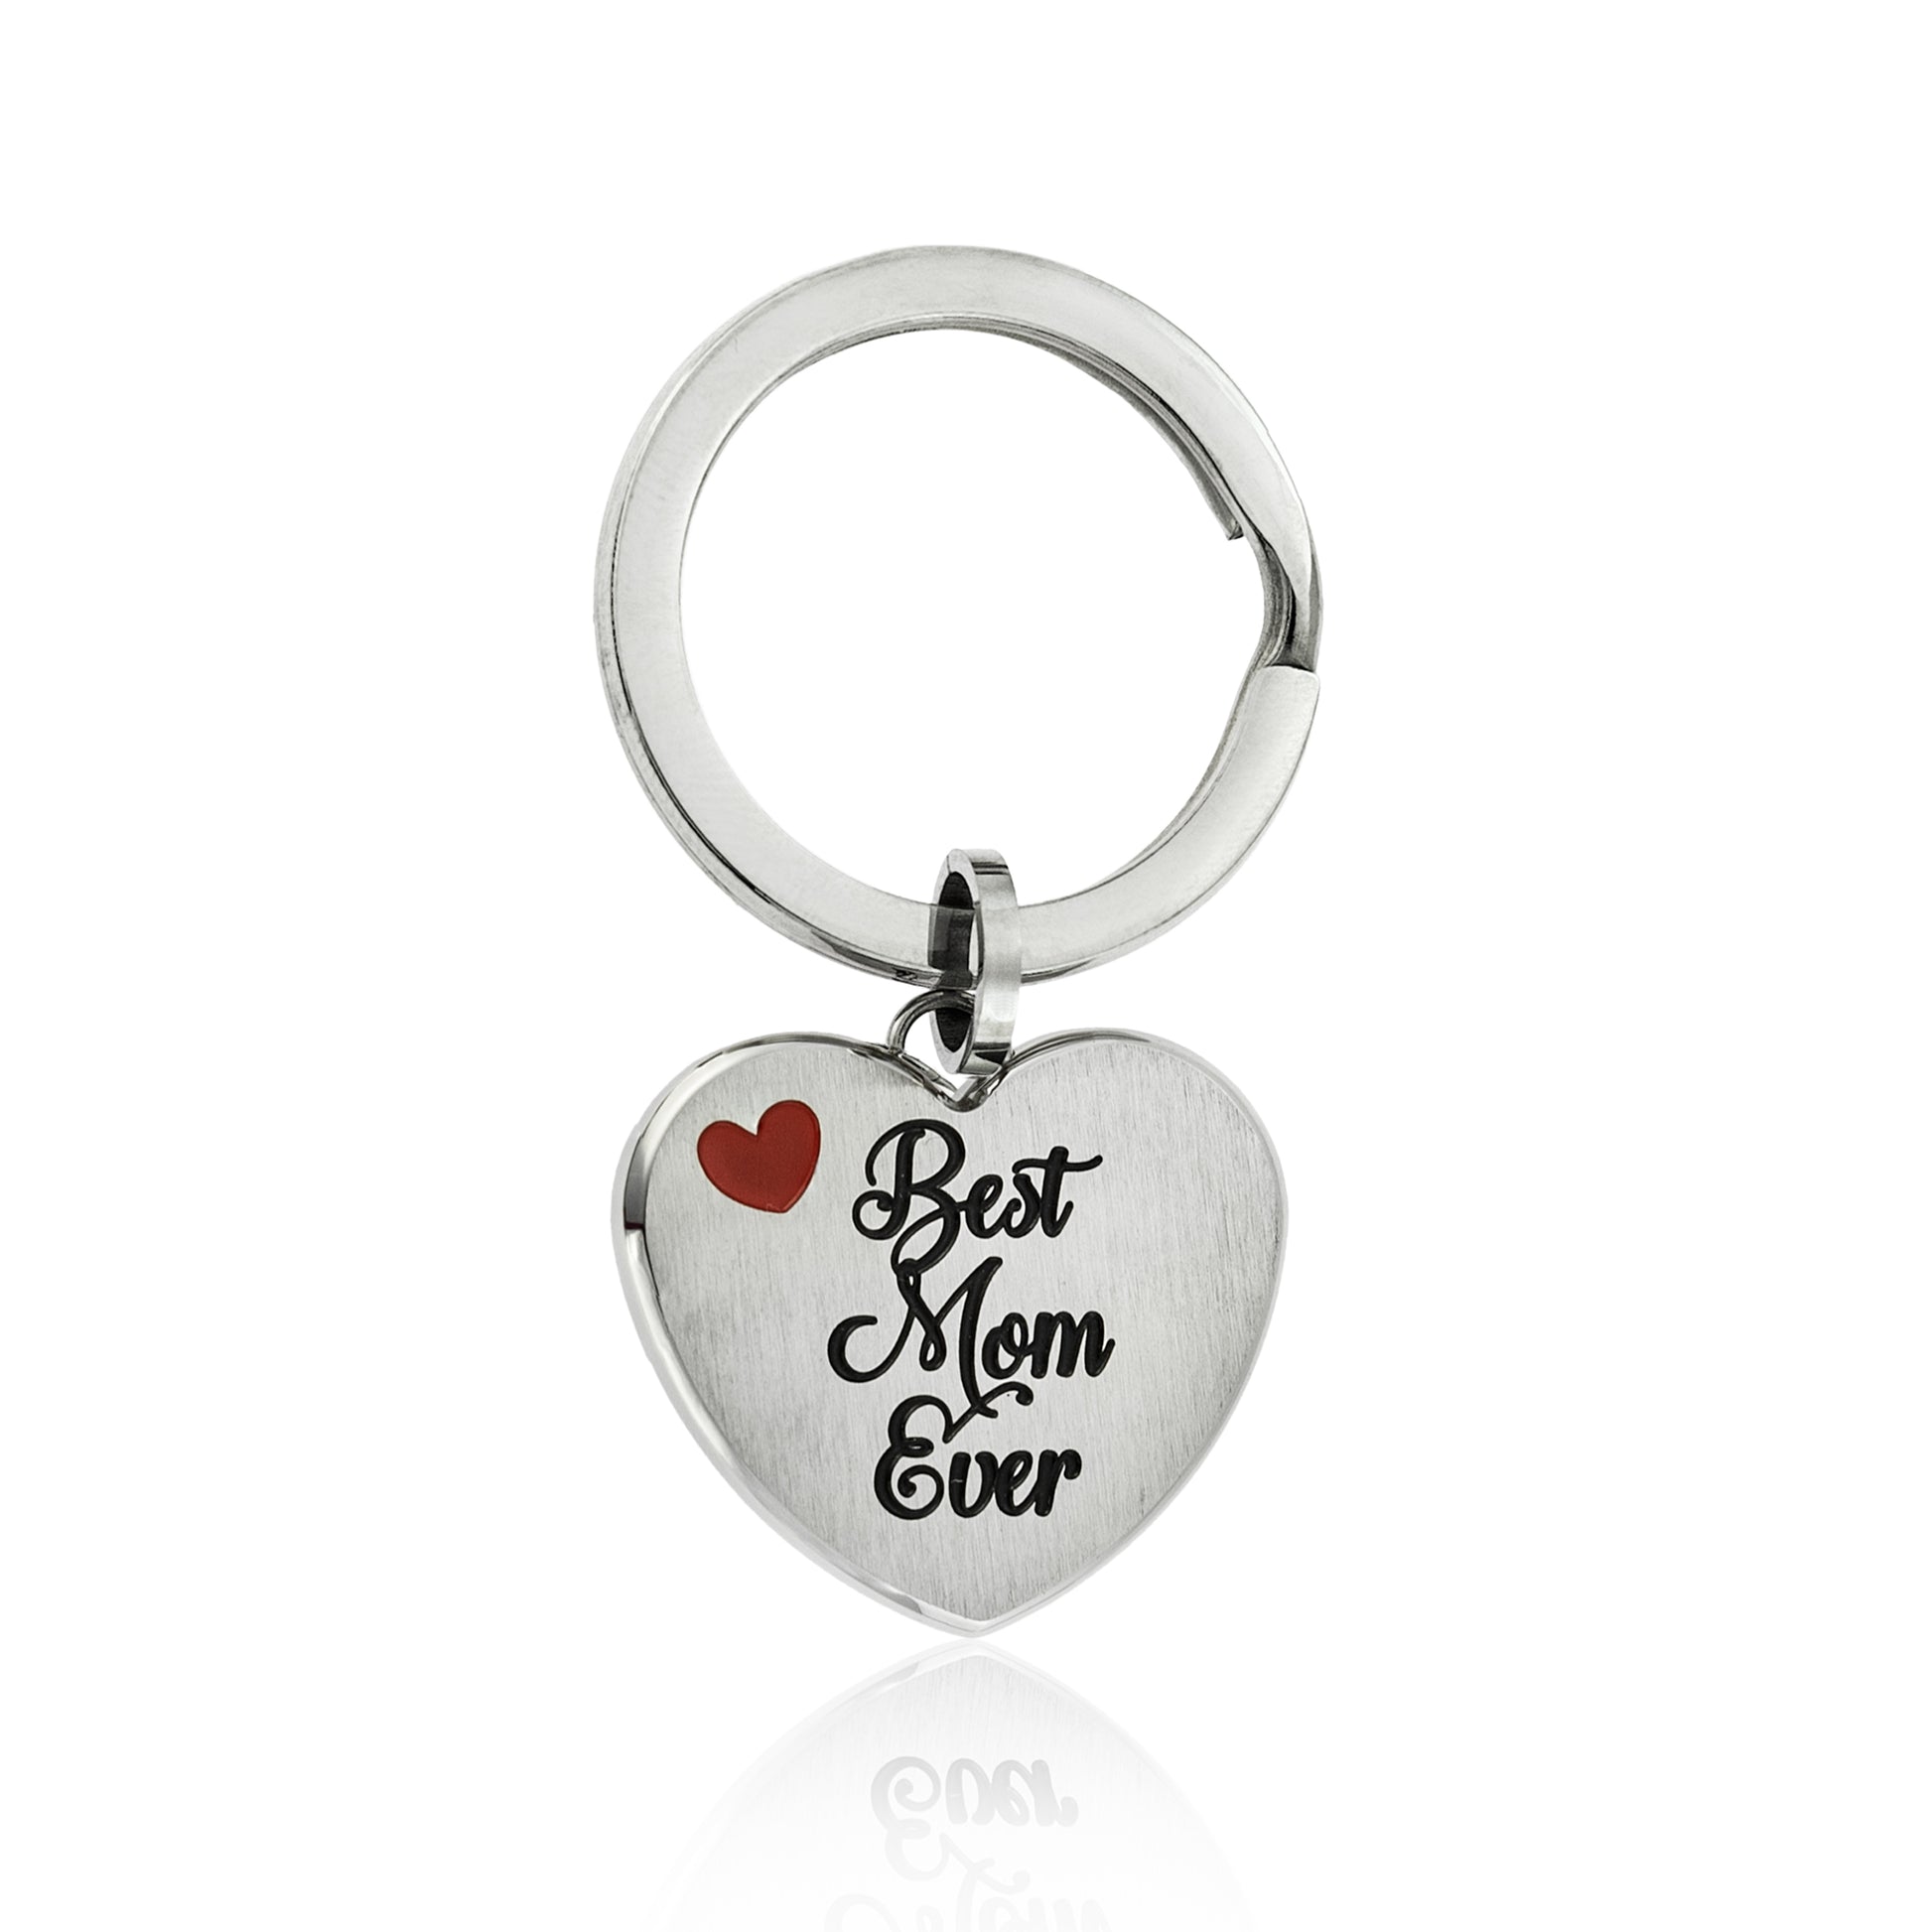 Best Mom Ever Heart Shaped Stainless Steel Keyring - Sentimental Mother's Day or Birthday Gift